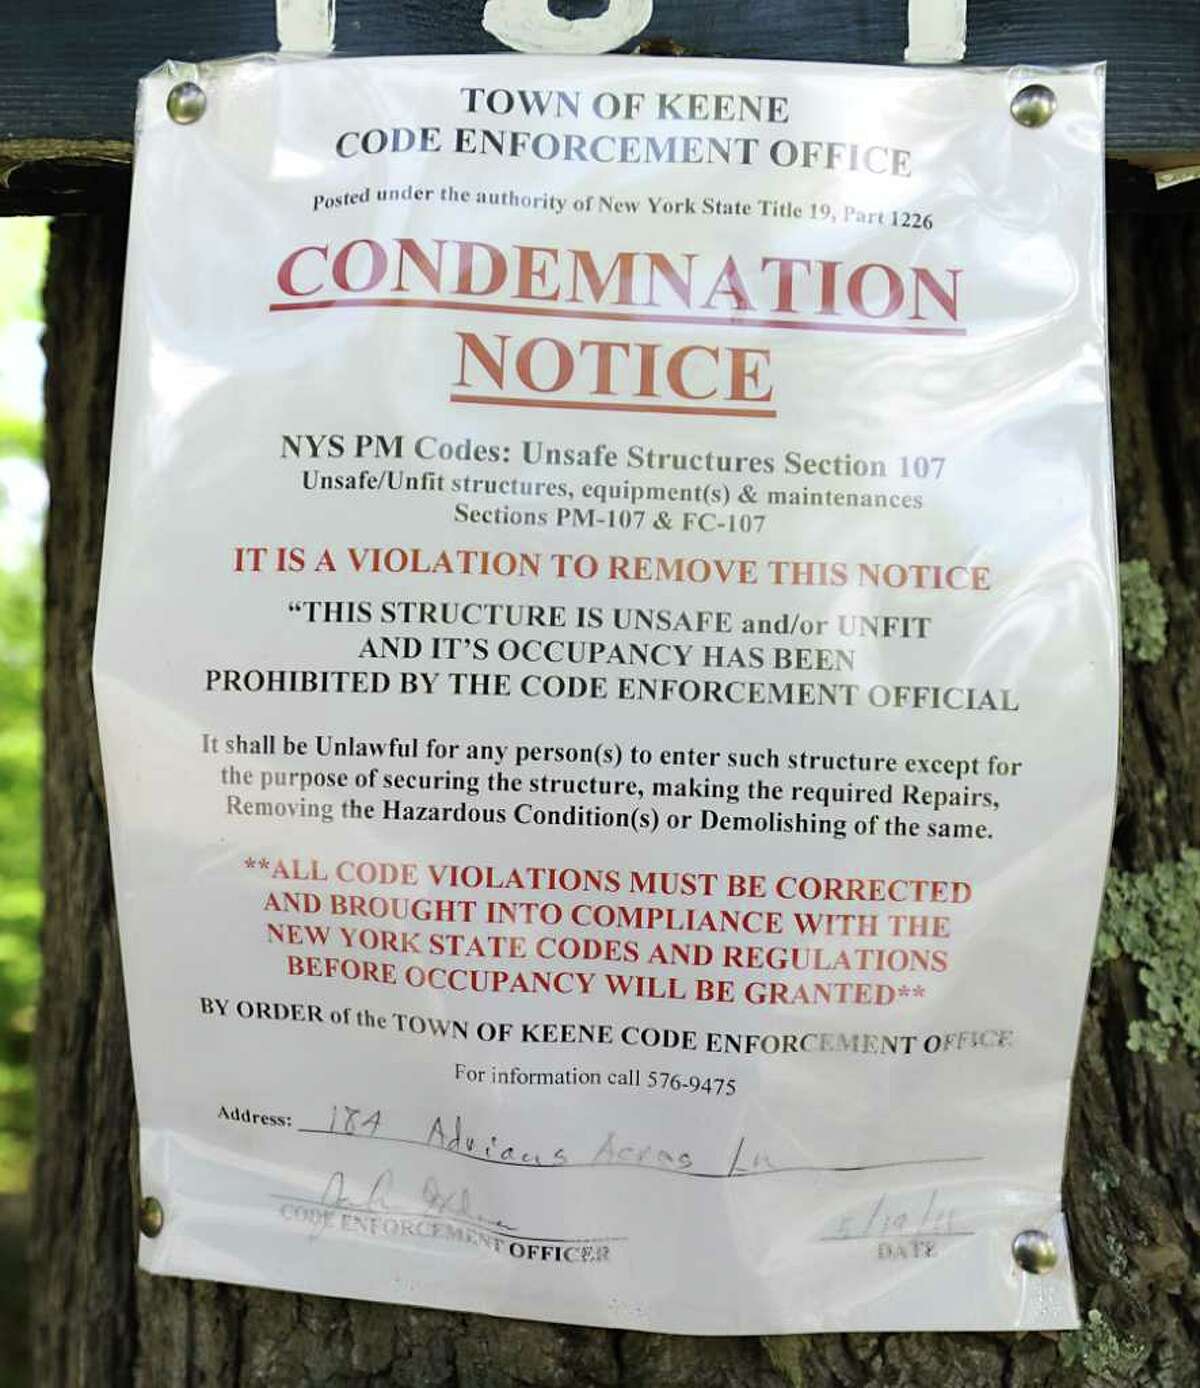 A condemnation notice is nailed to a tree at the beginning of the Machold's driveway in Keene Valley, N.Y. Tuesday May 31, 2011. (Lori Van Buren / Times Union)